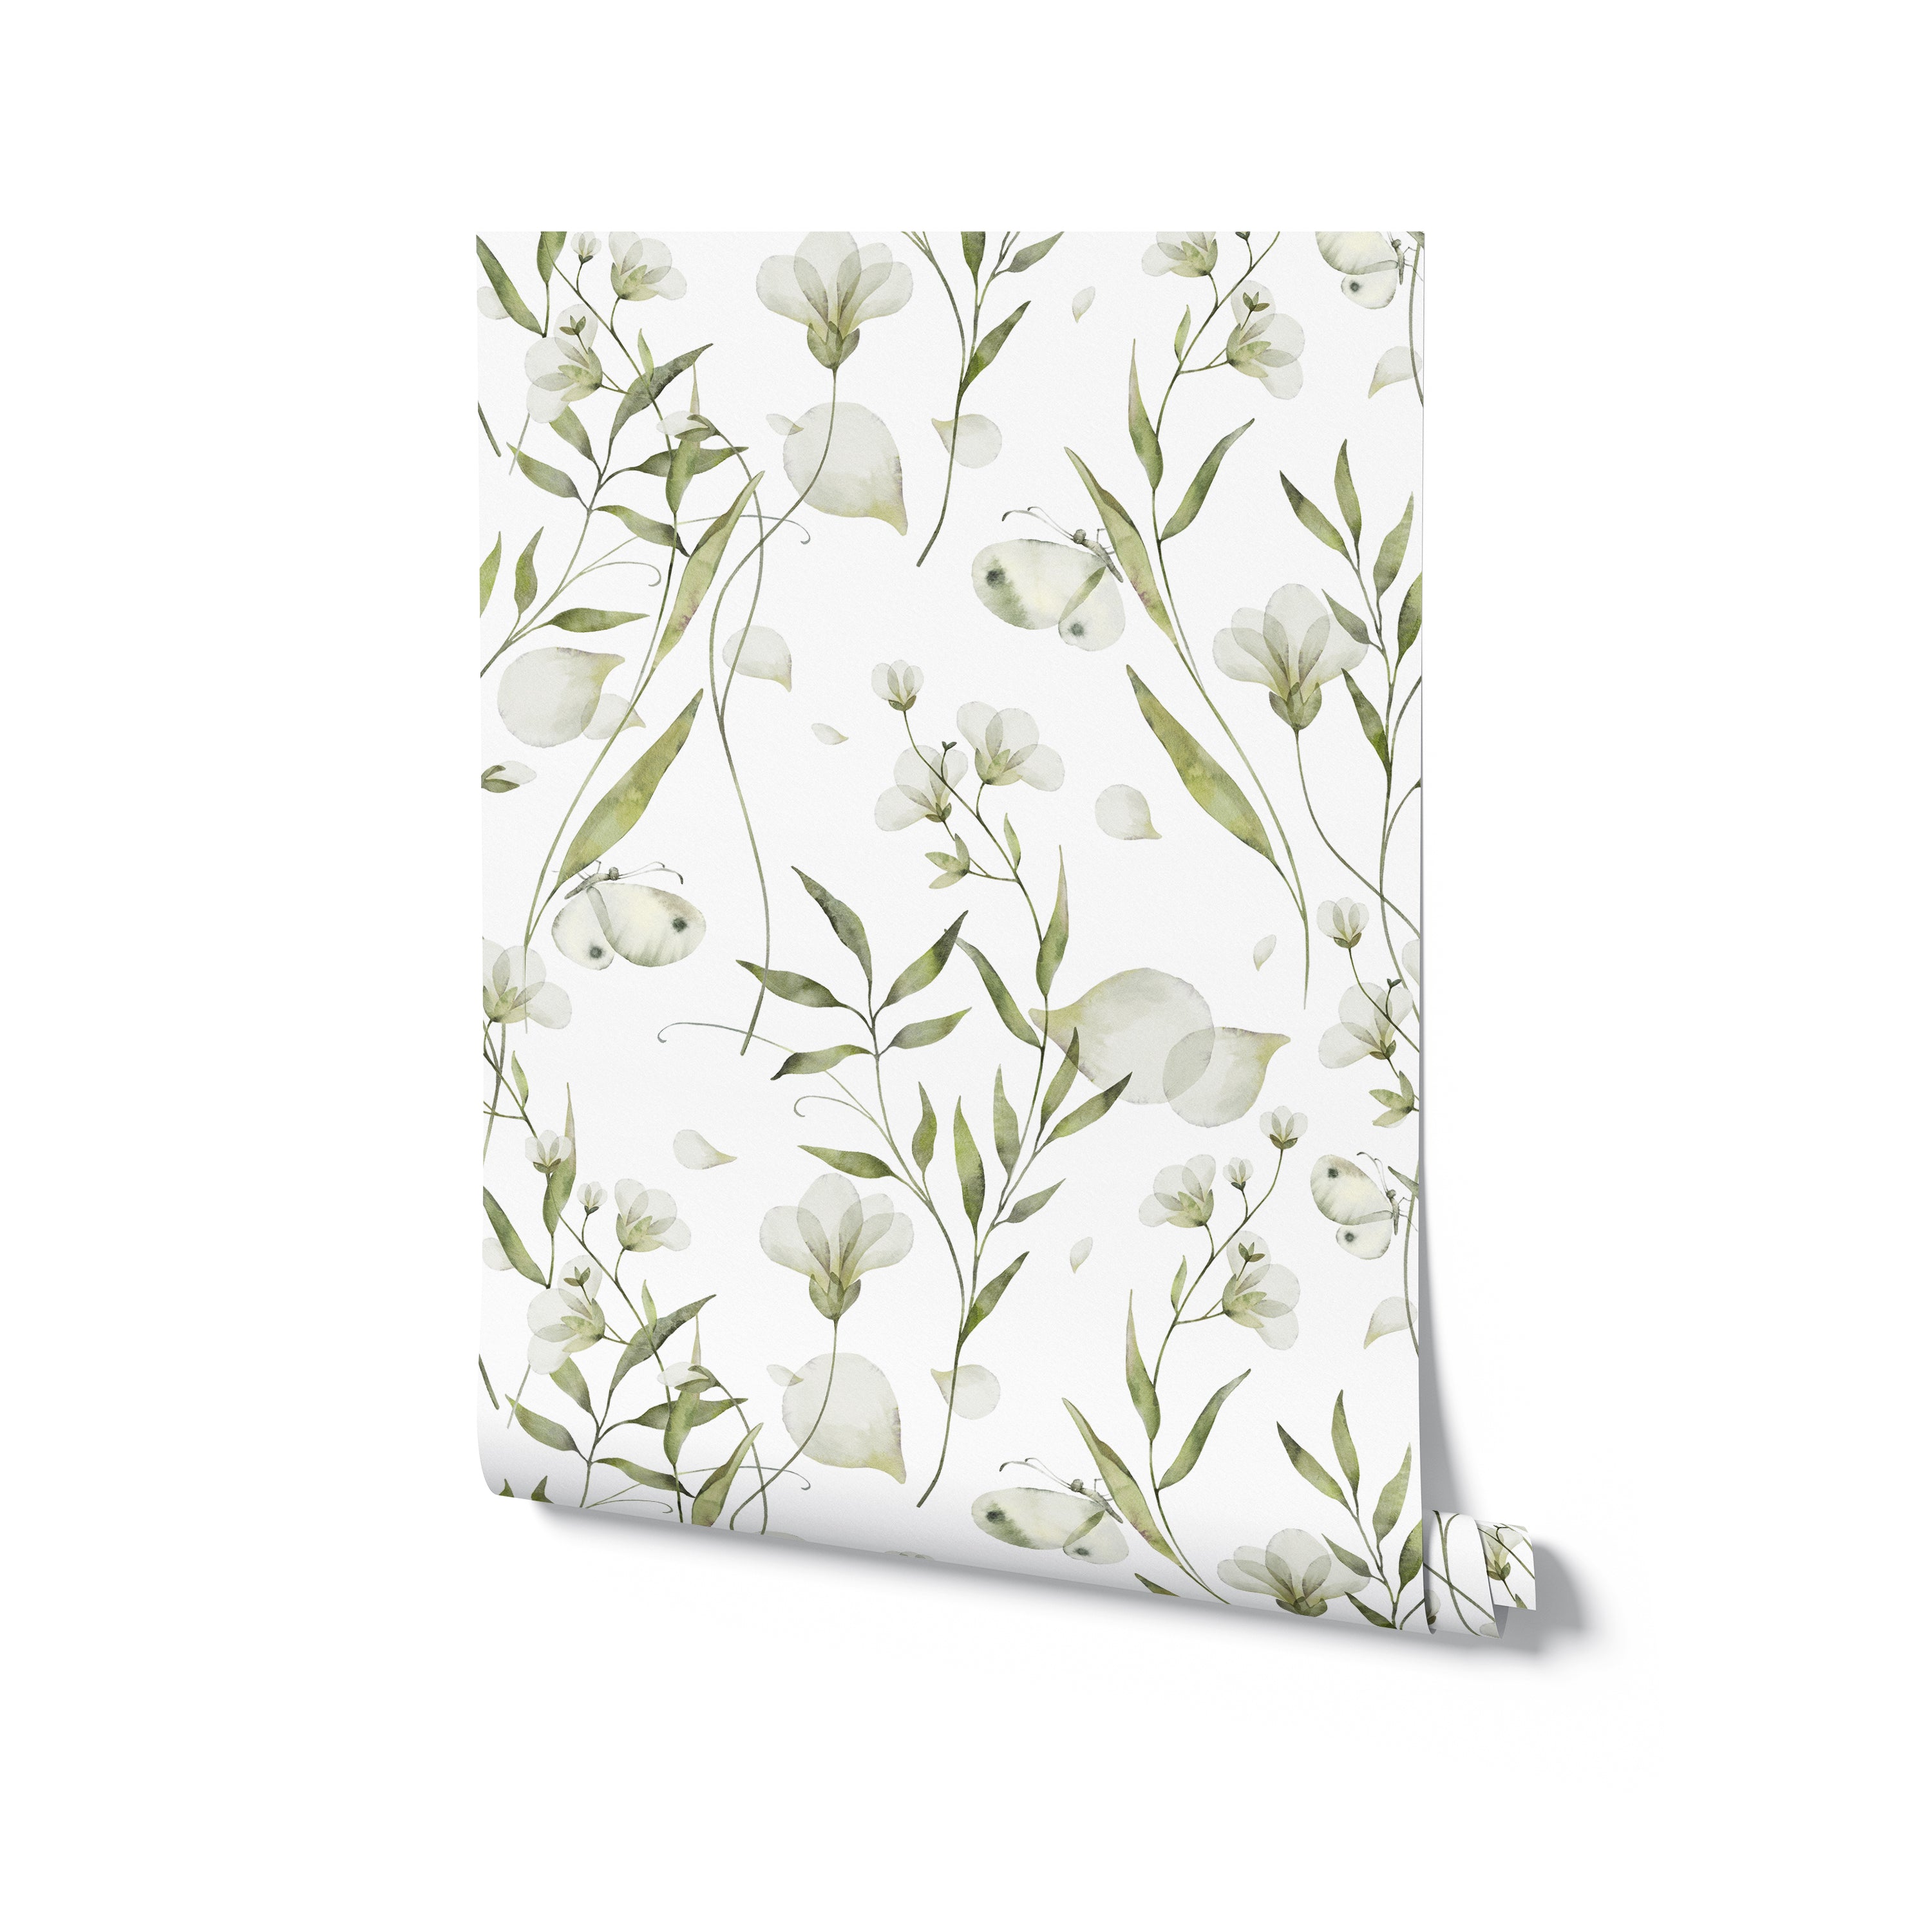 A roll of 'Botanical Bliss Wallpaper' displayed against a white backdrop, with the paper partially unrolled to reveal the elegant botanical print. The watercolor leaves and blooms are scattered in a pattern that suggests a gentle, airy garden, inviting a sense of peace and calm into any room.